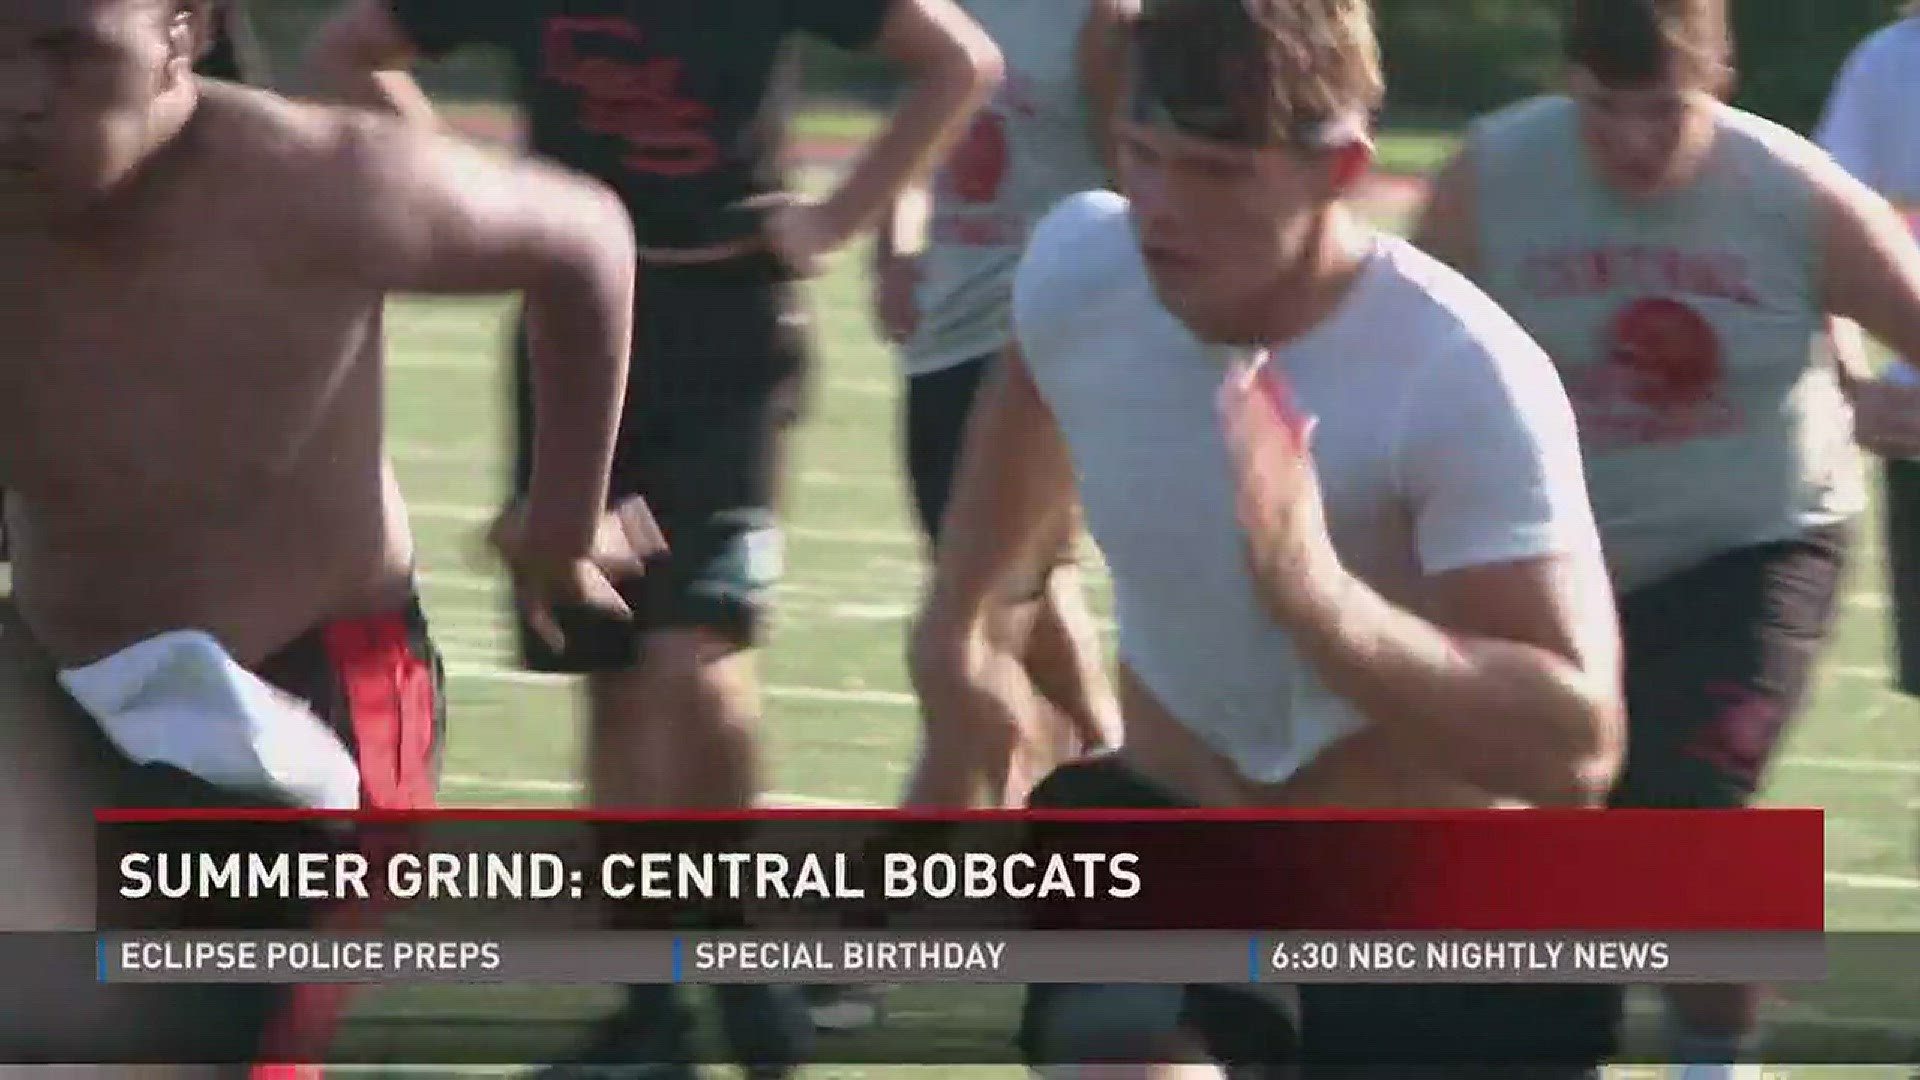 The Central Bobcats look to improve on their best season they've seen yet under Coach Bryson Rosser.